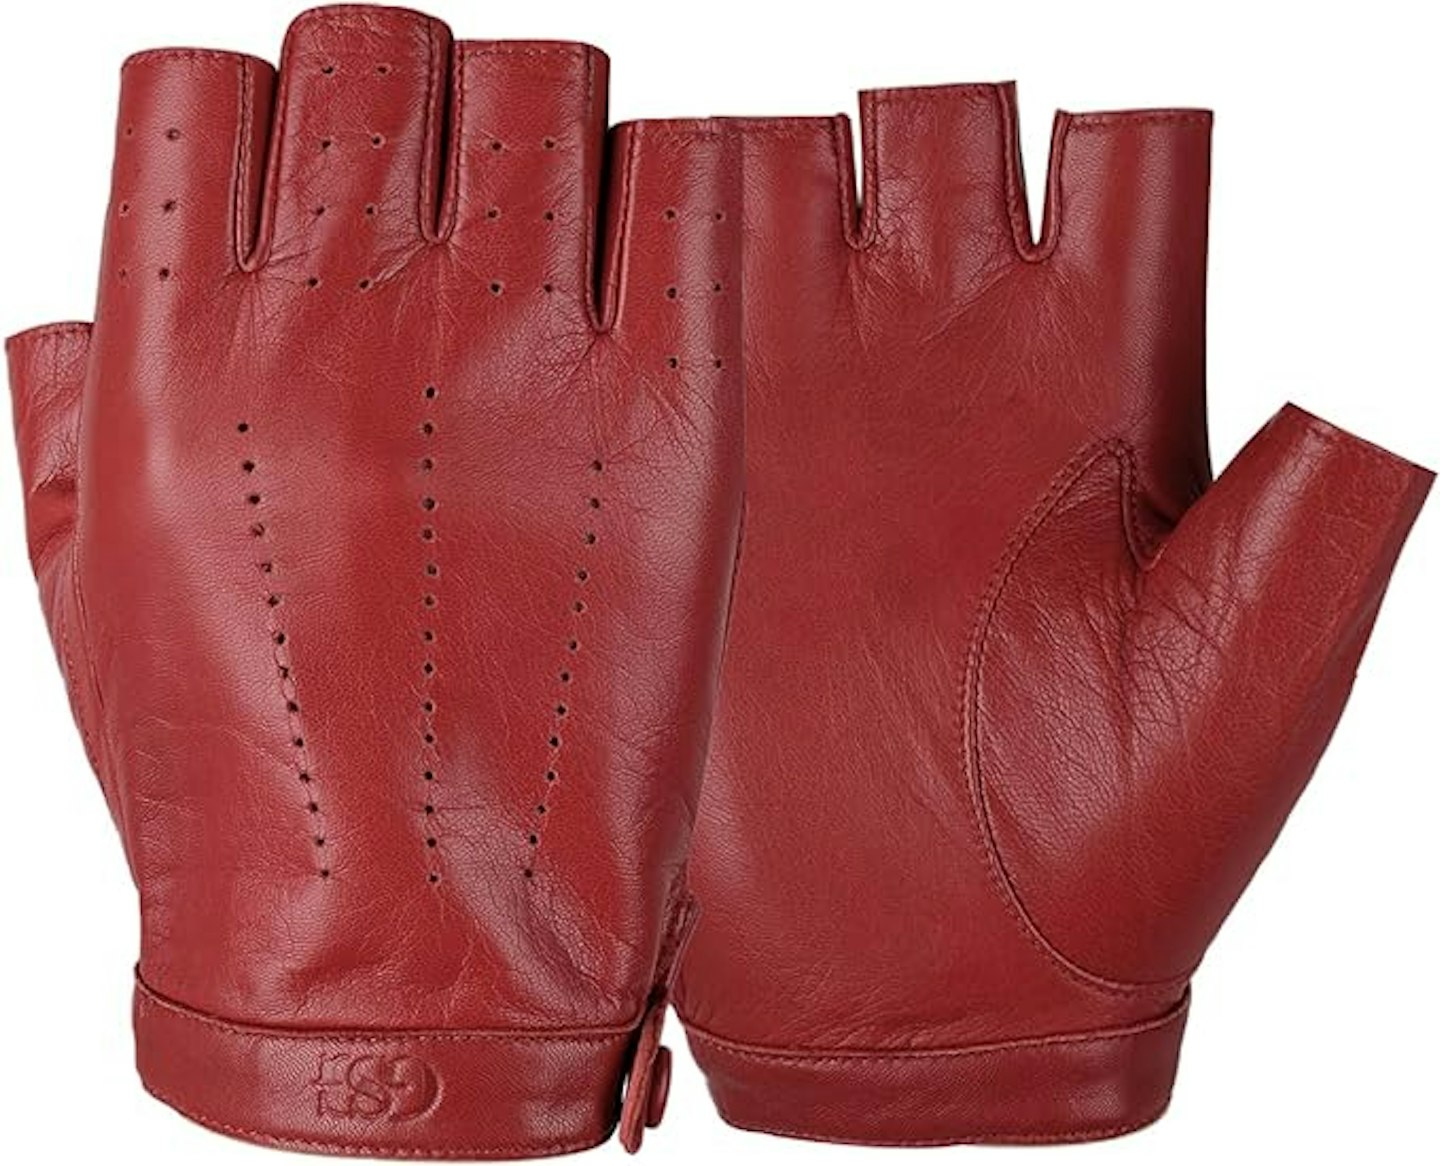 claudia winkleman's red leather gloves 